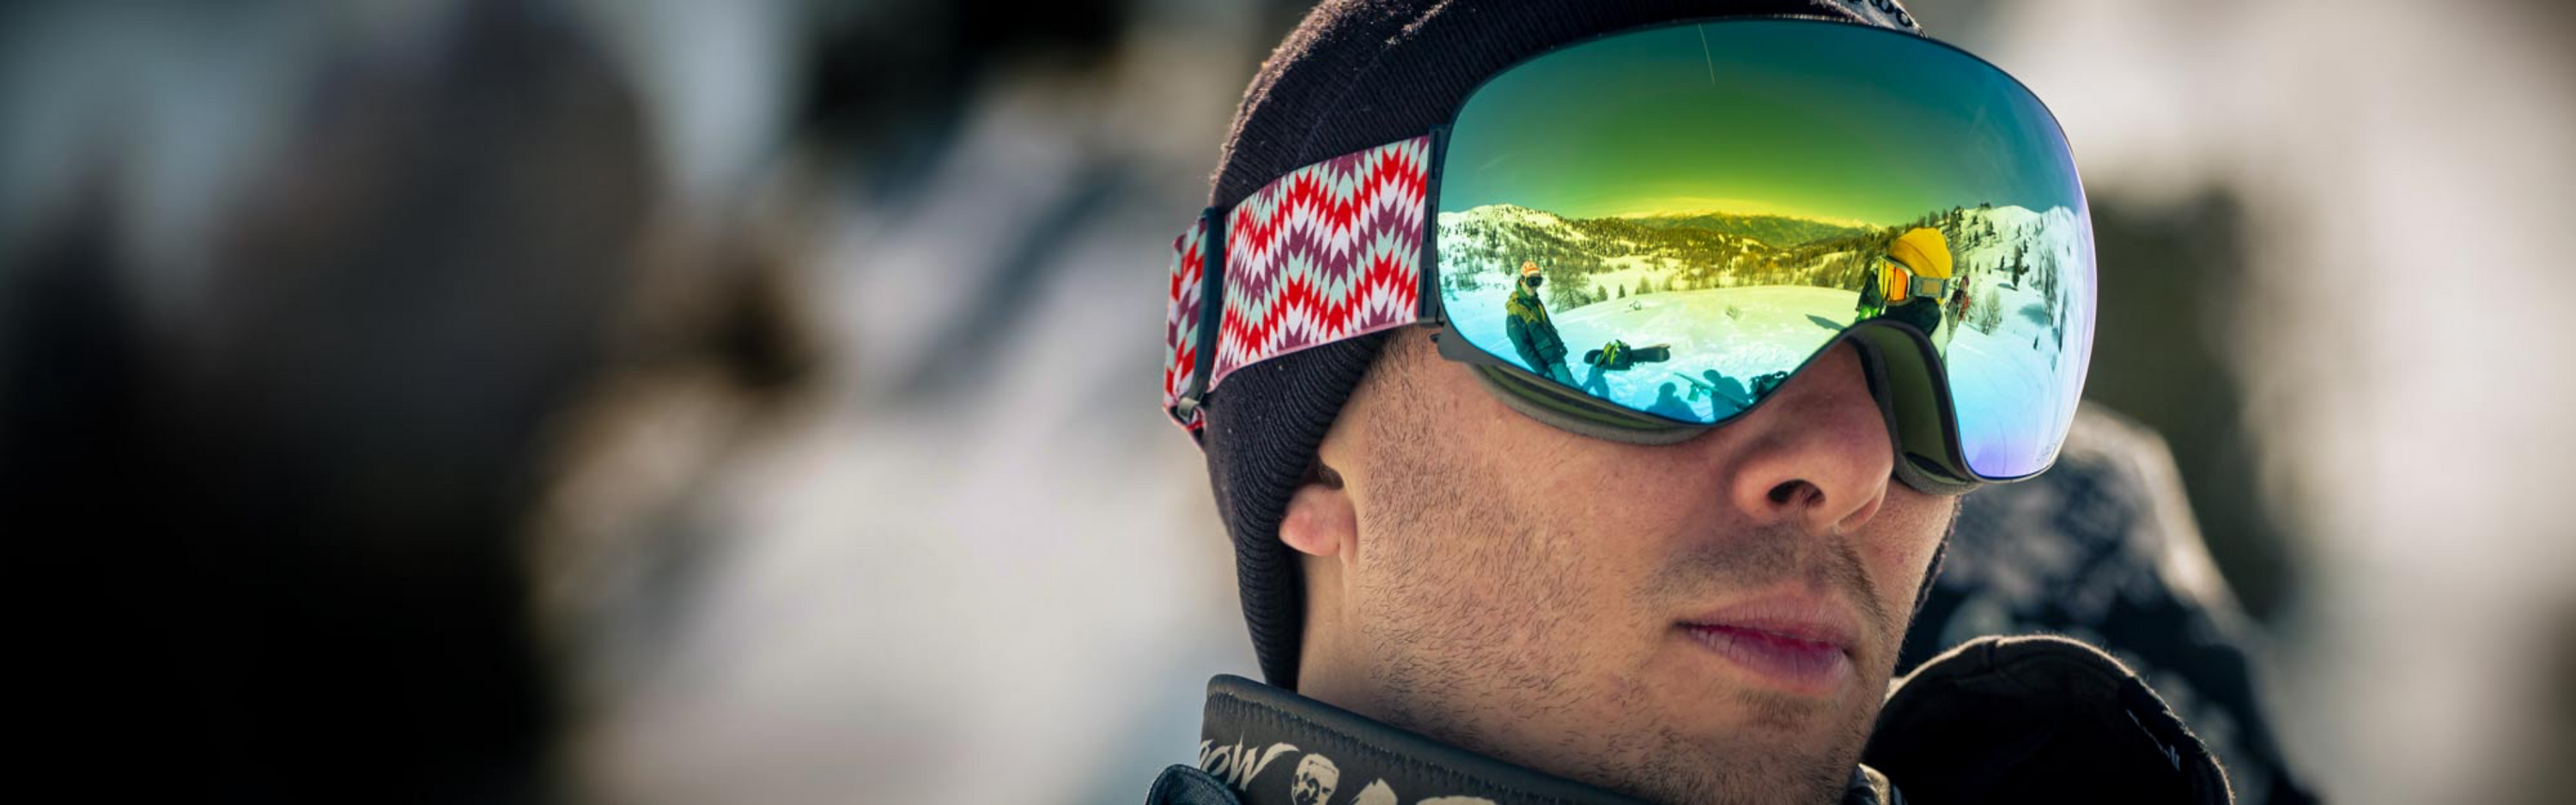 Xpr snow goggles of Aphex, perfect for many weather conditions thanks to the change magnetic lens system